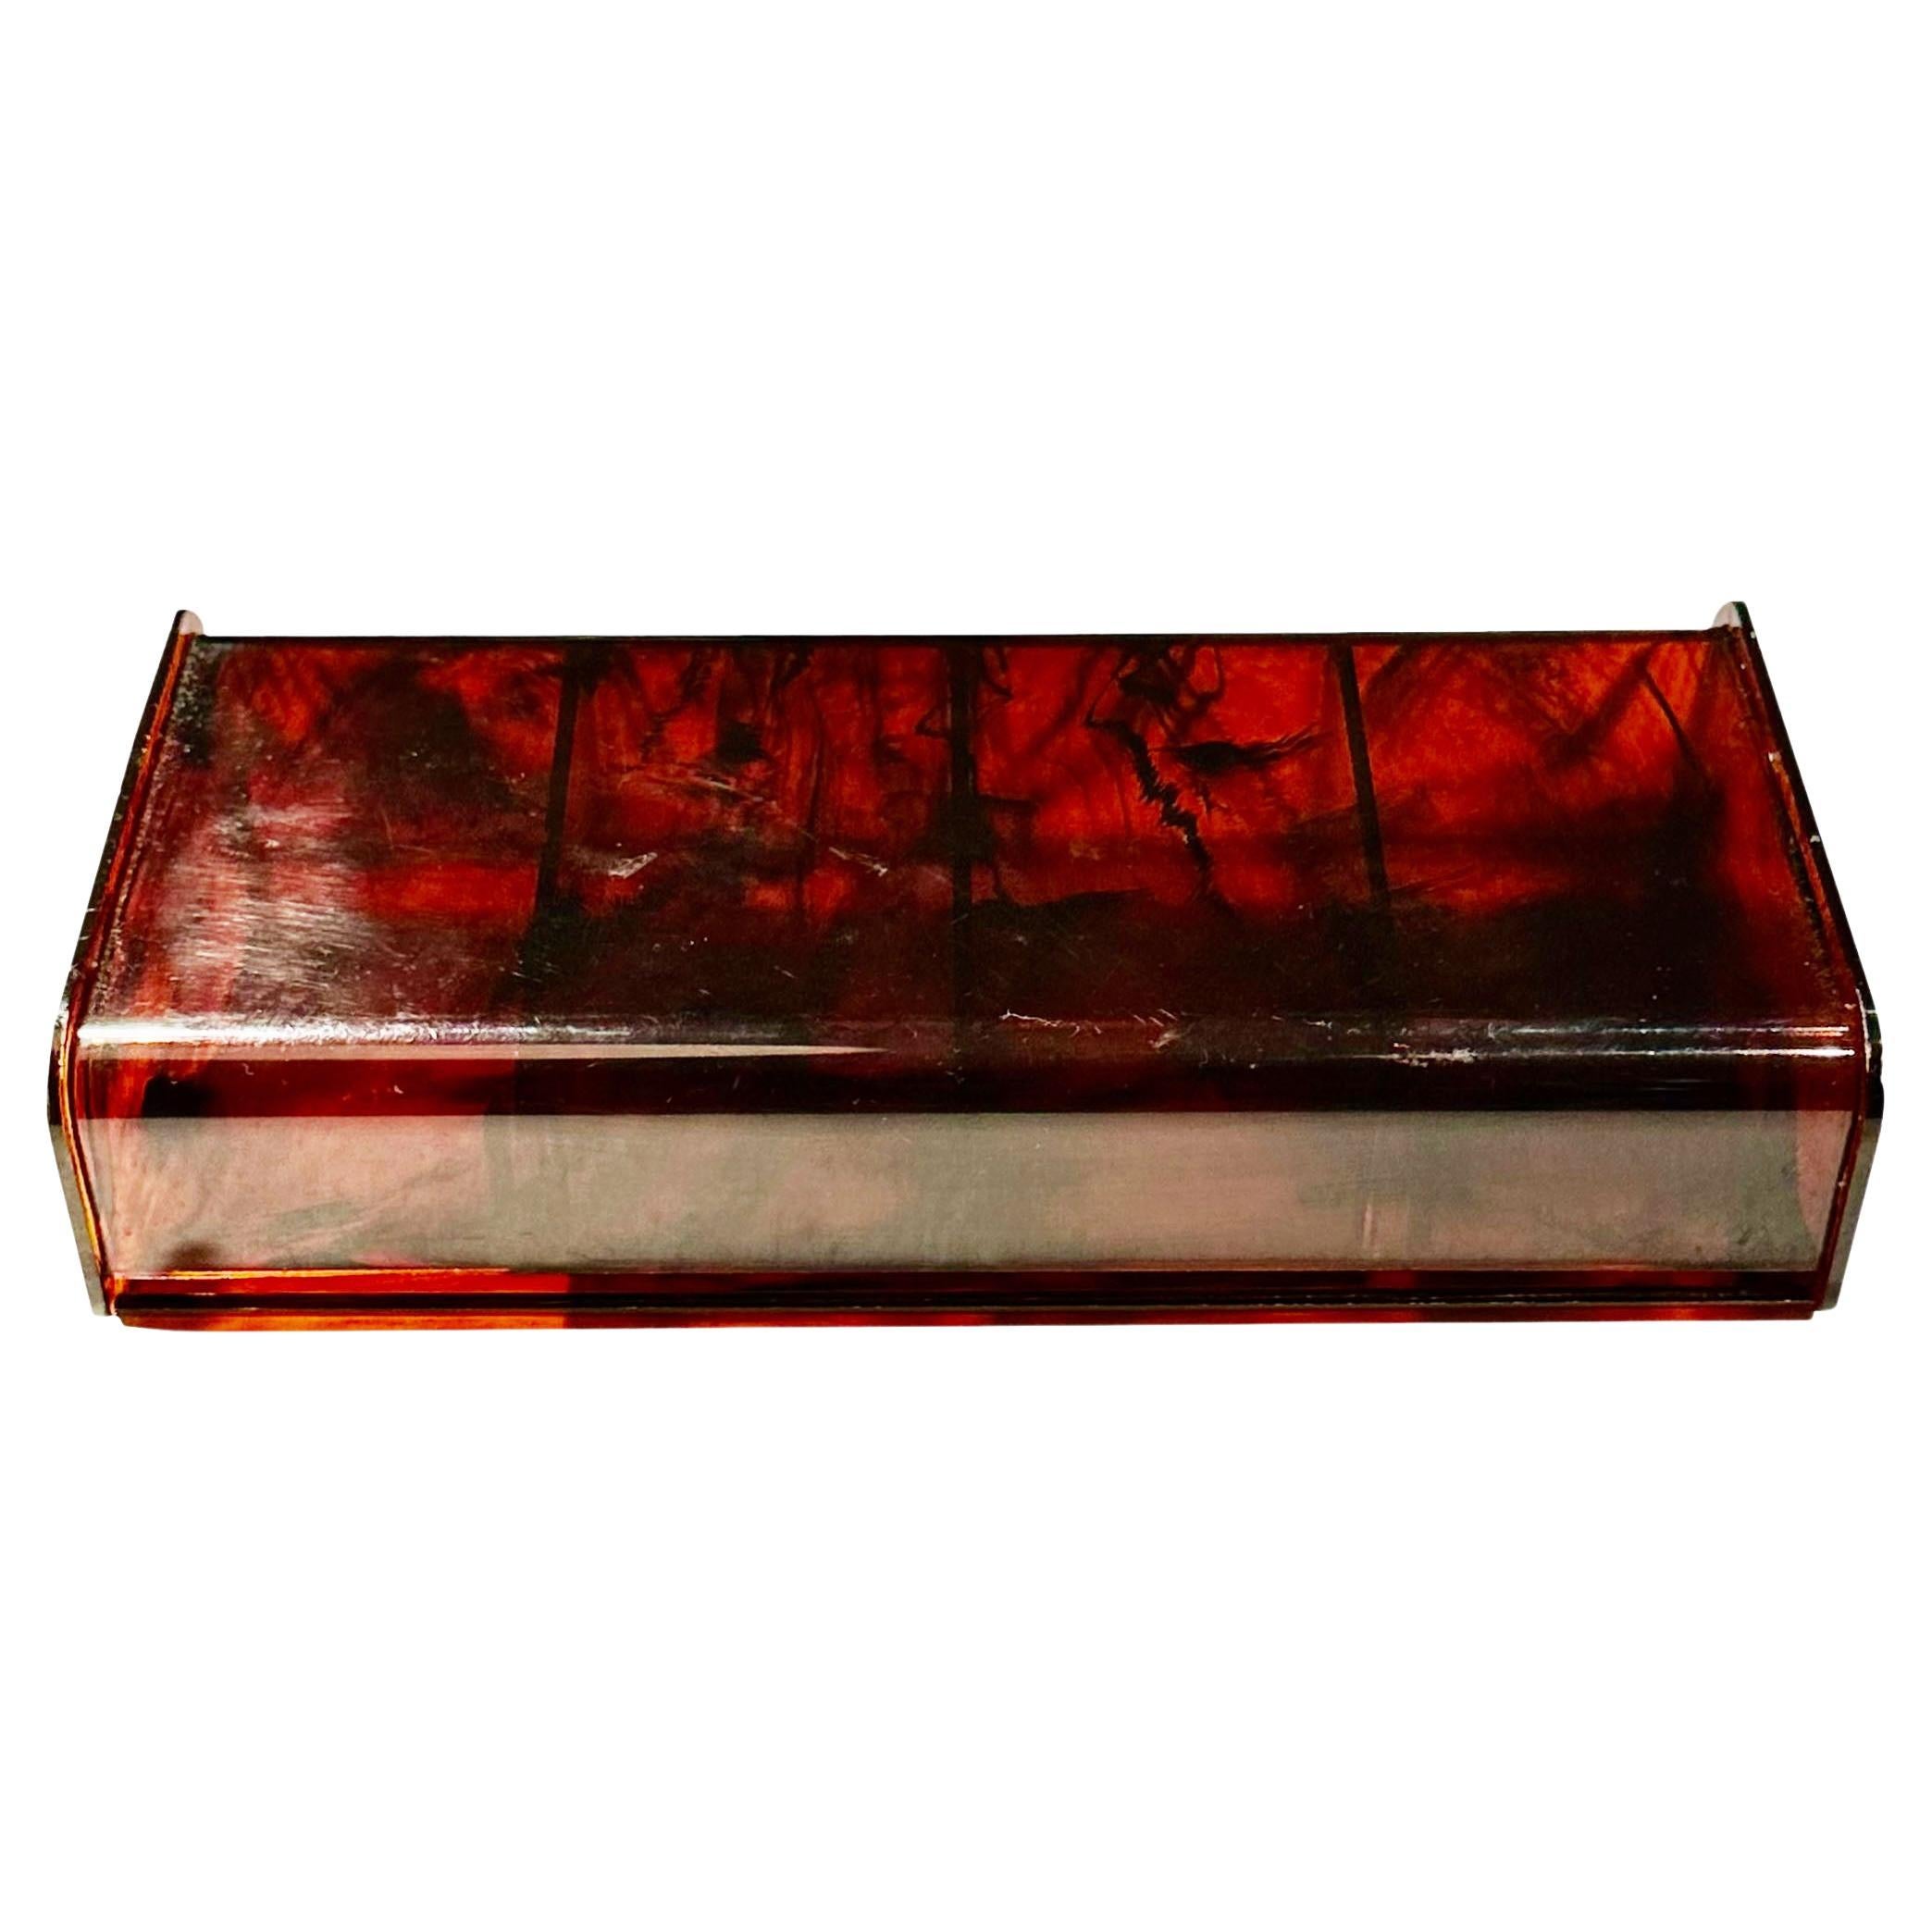 A wonderful 1950s Faux Tortoiseshell Lucite box with detachable compartments. A great addition to any lucite collection.